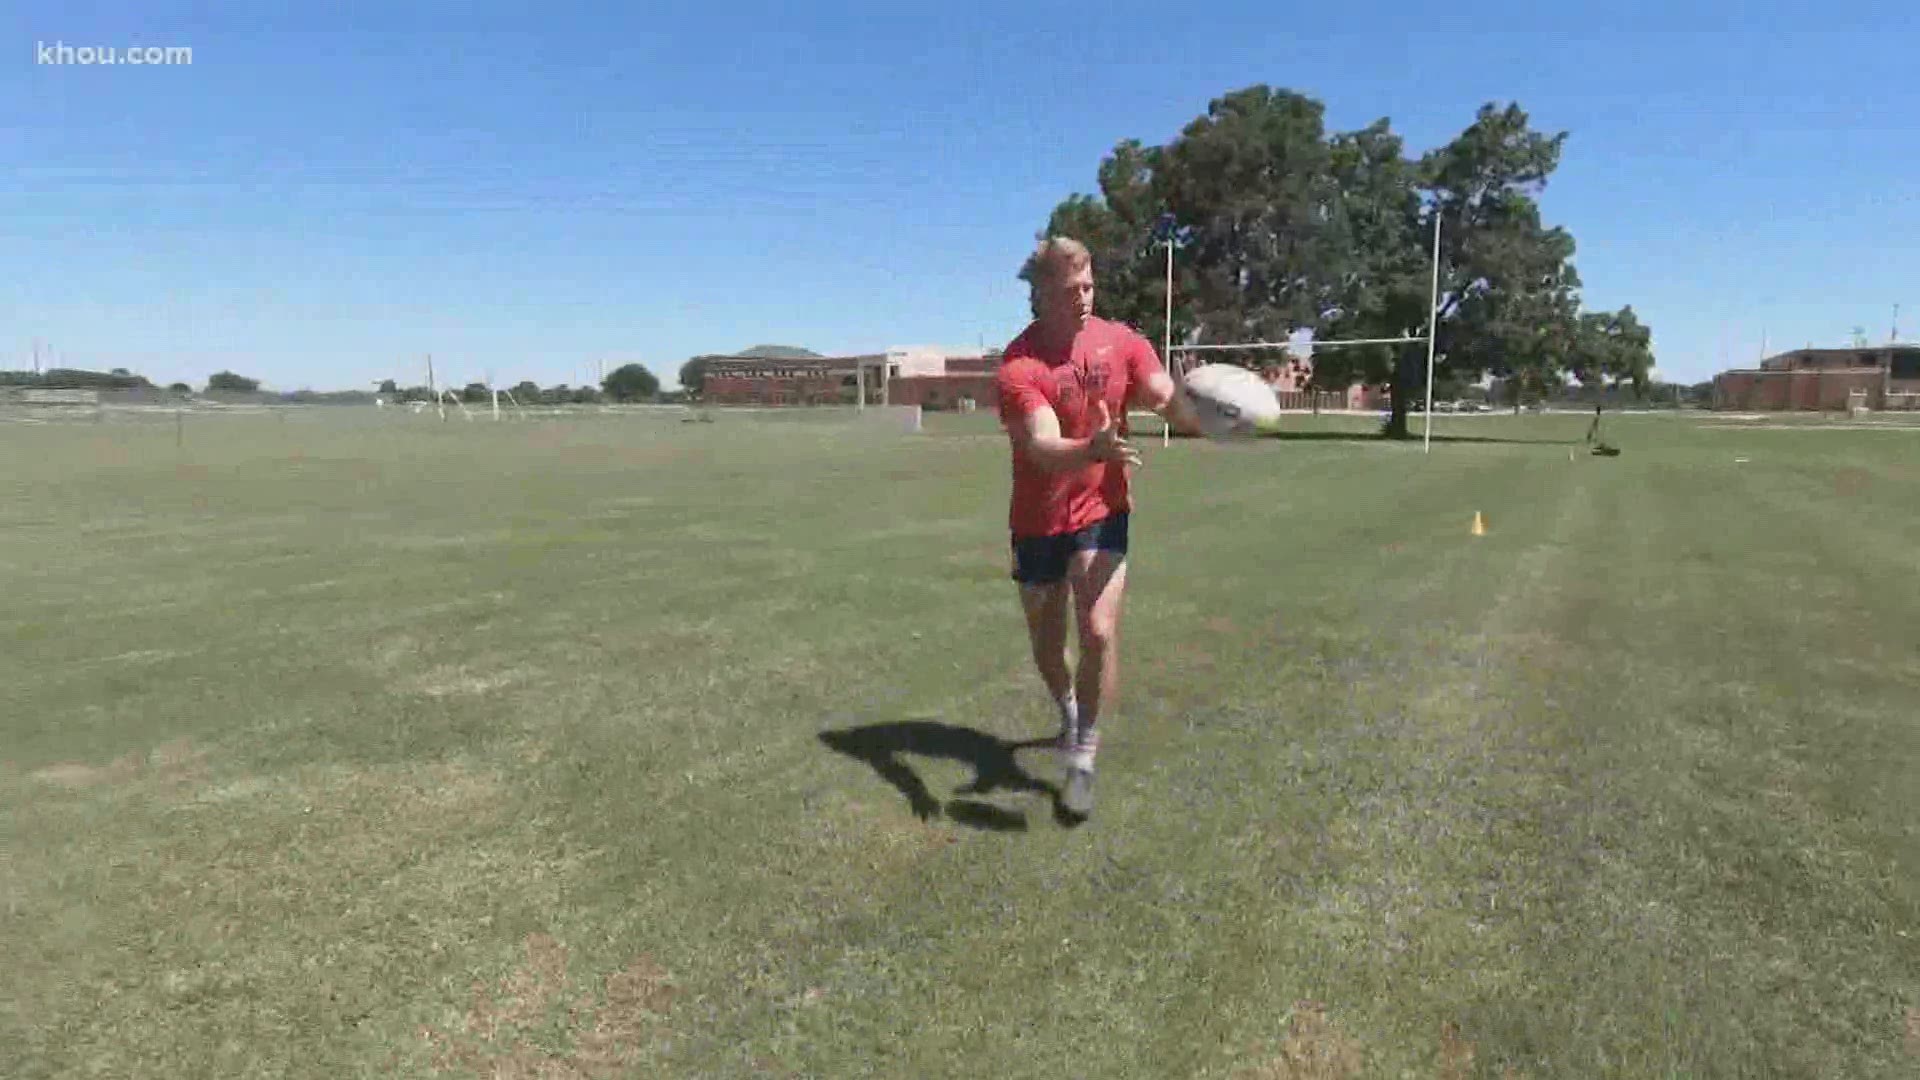 Bronson Teles, a rugby player from Richmond, hopes to make his mark by becoming the "J.J. Watt of professional rugby."